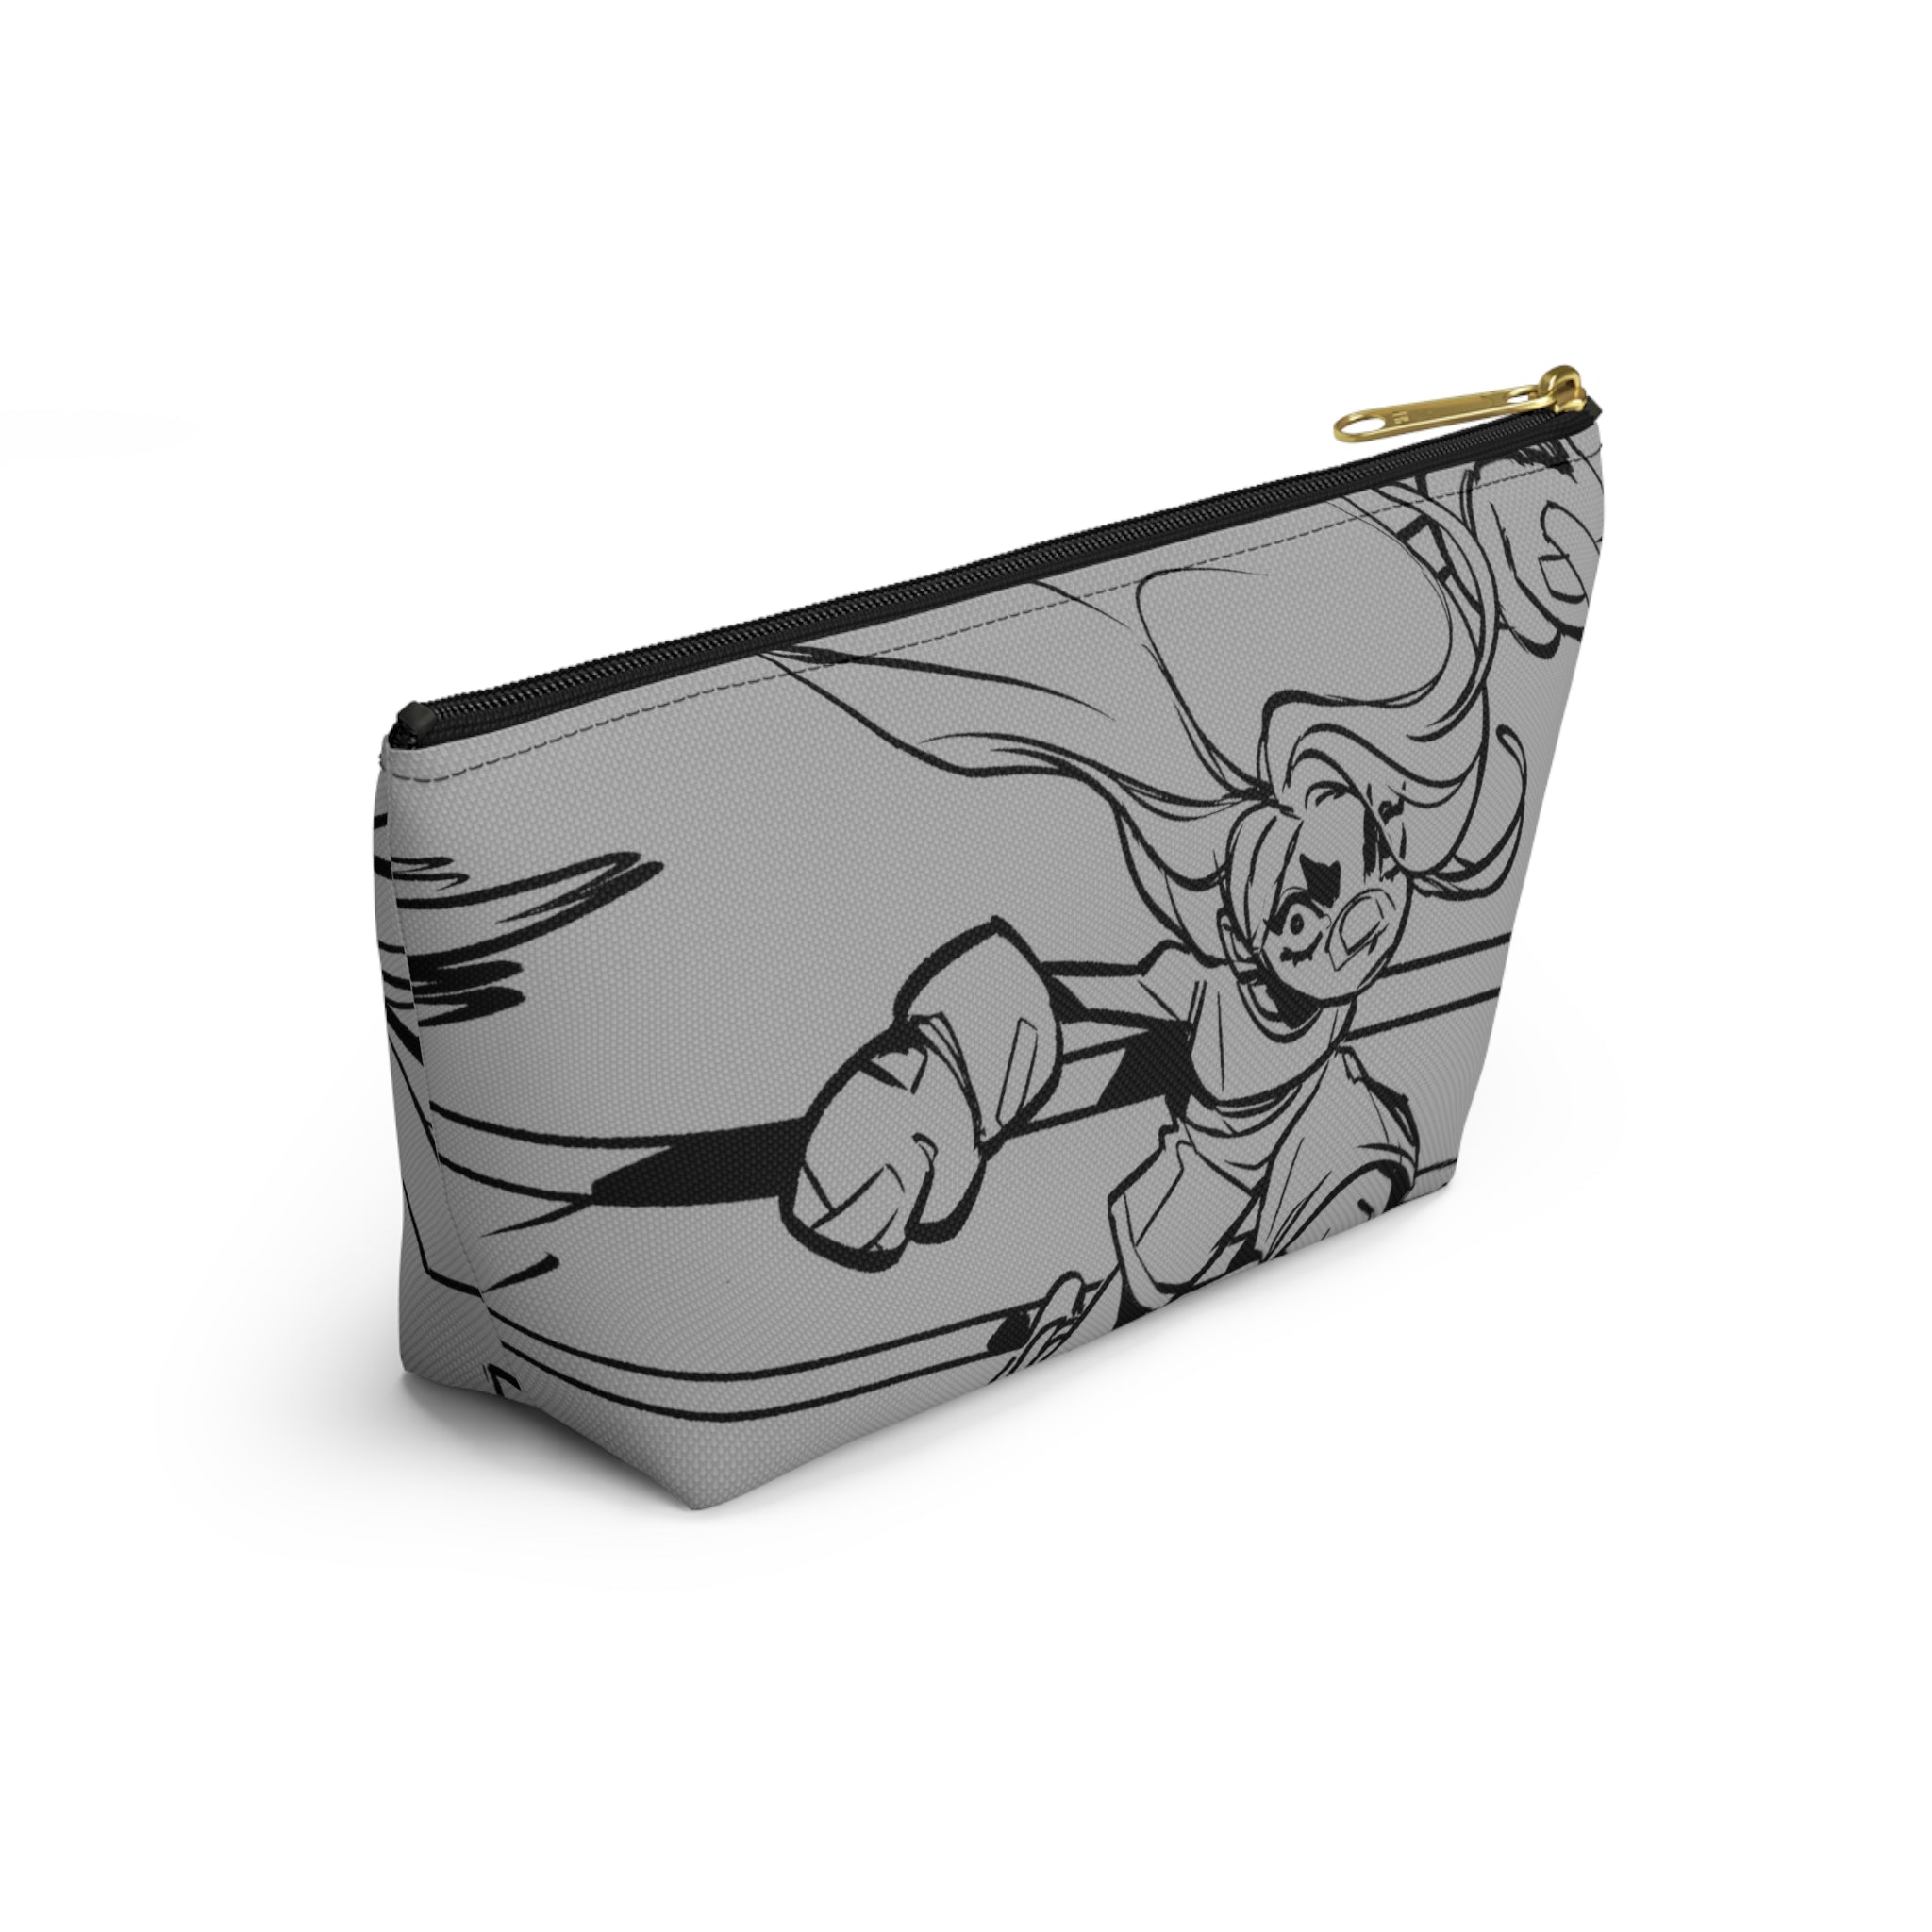 Super Punchy Girl Pouch (Grey)